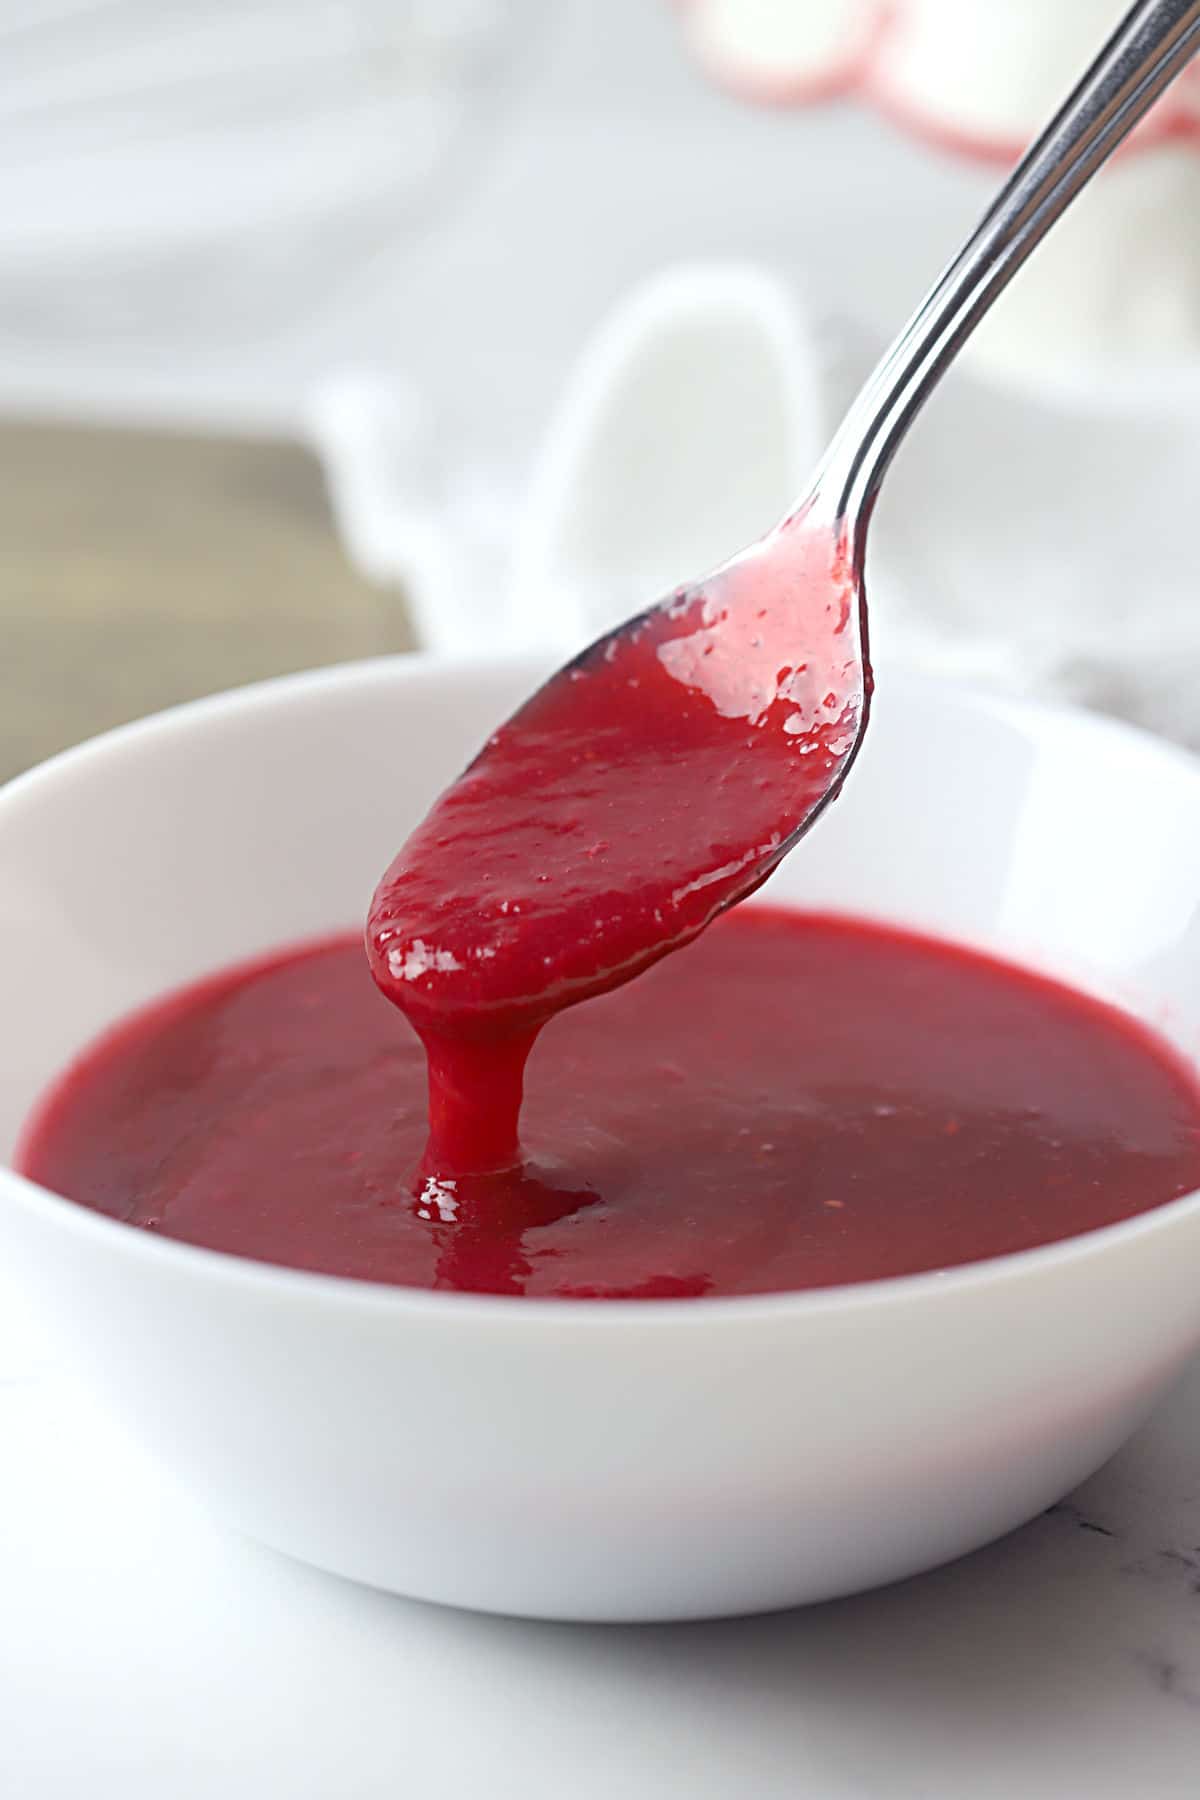 A spoon scooping raspberry sauce from a white bowl.